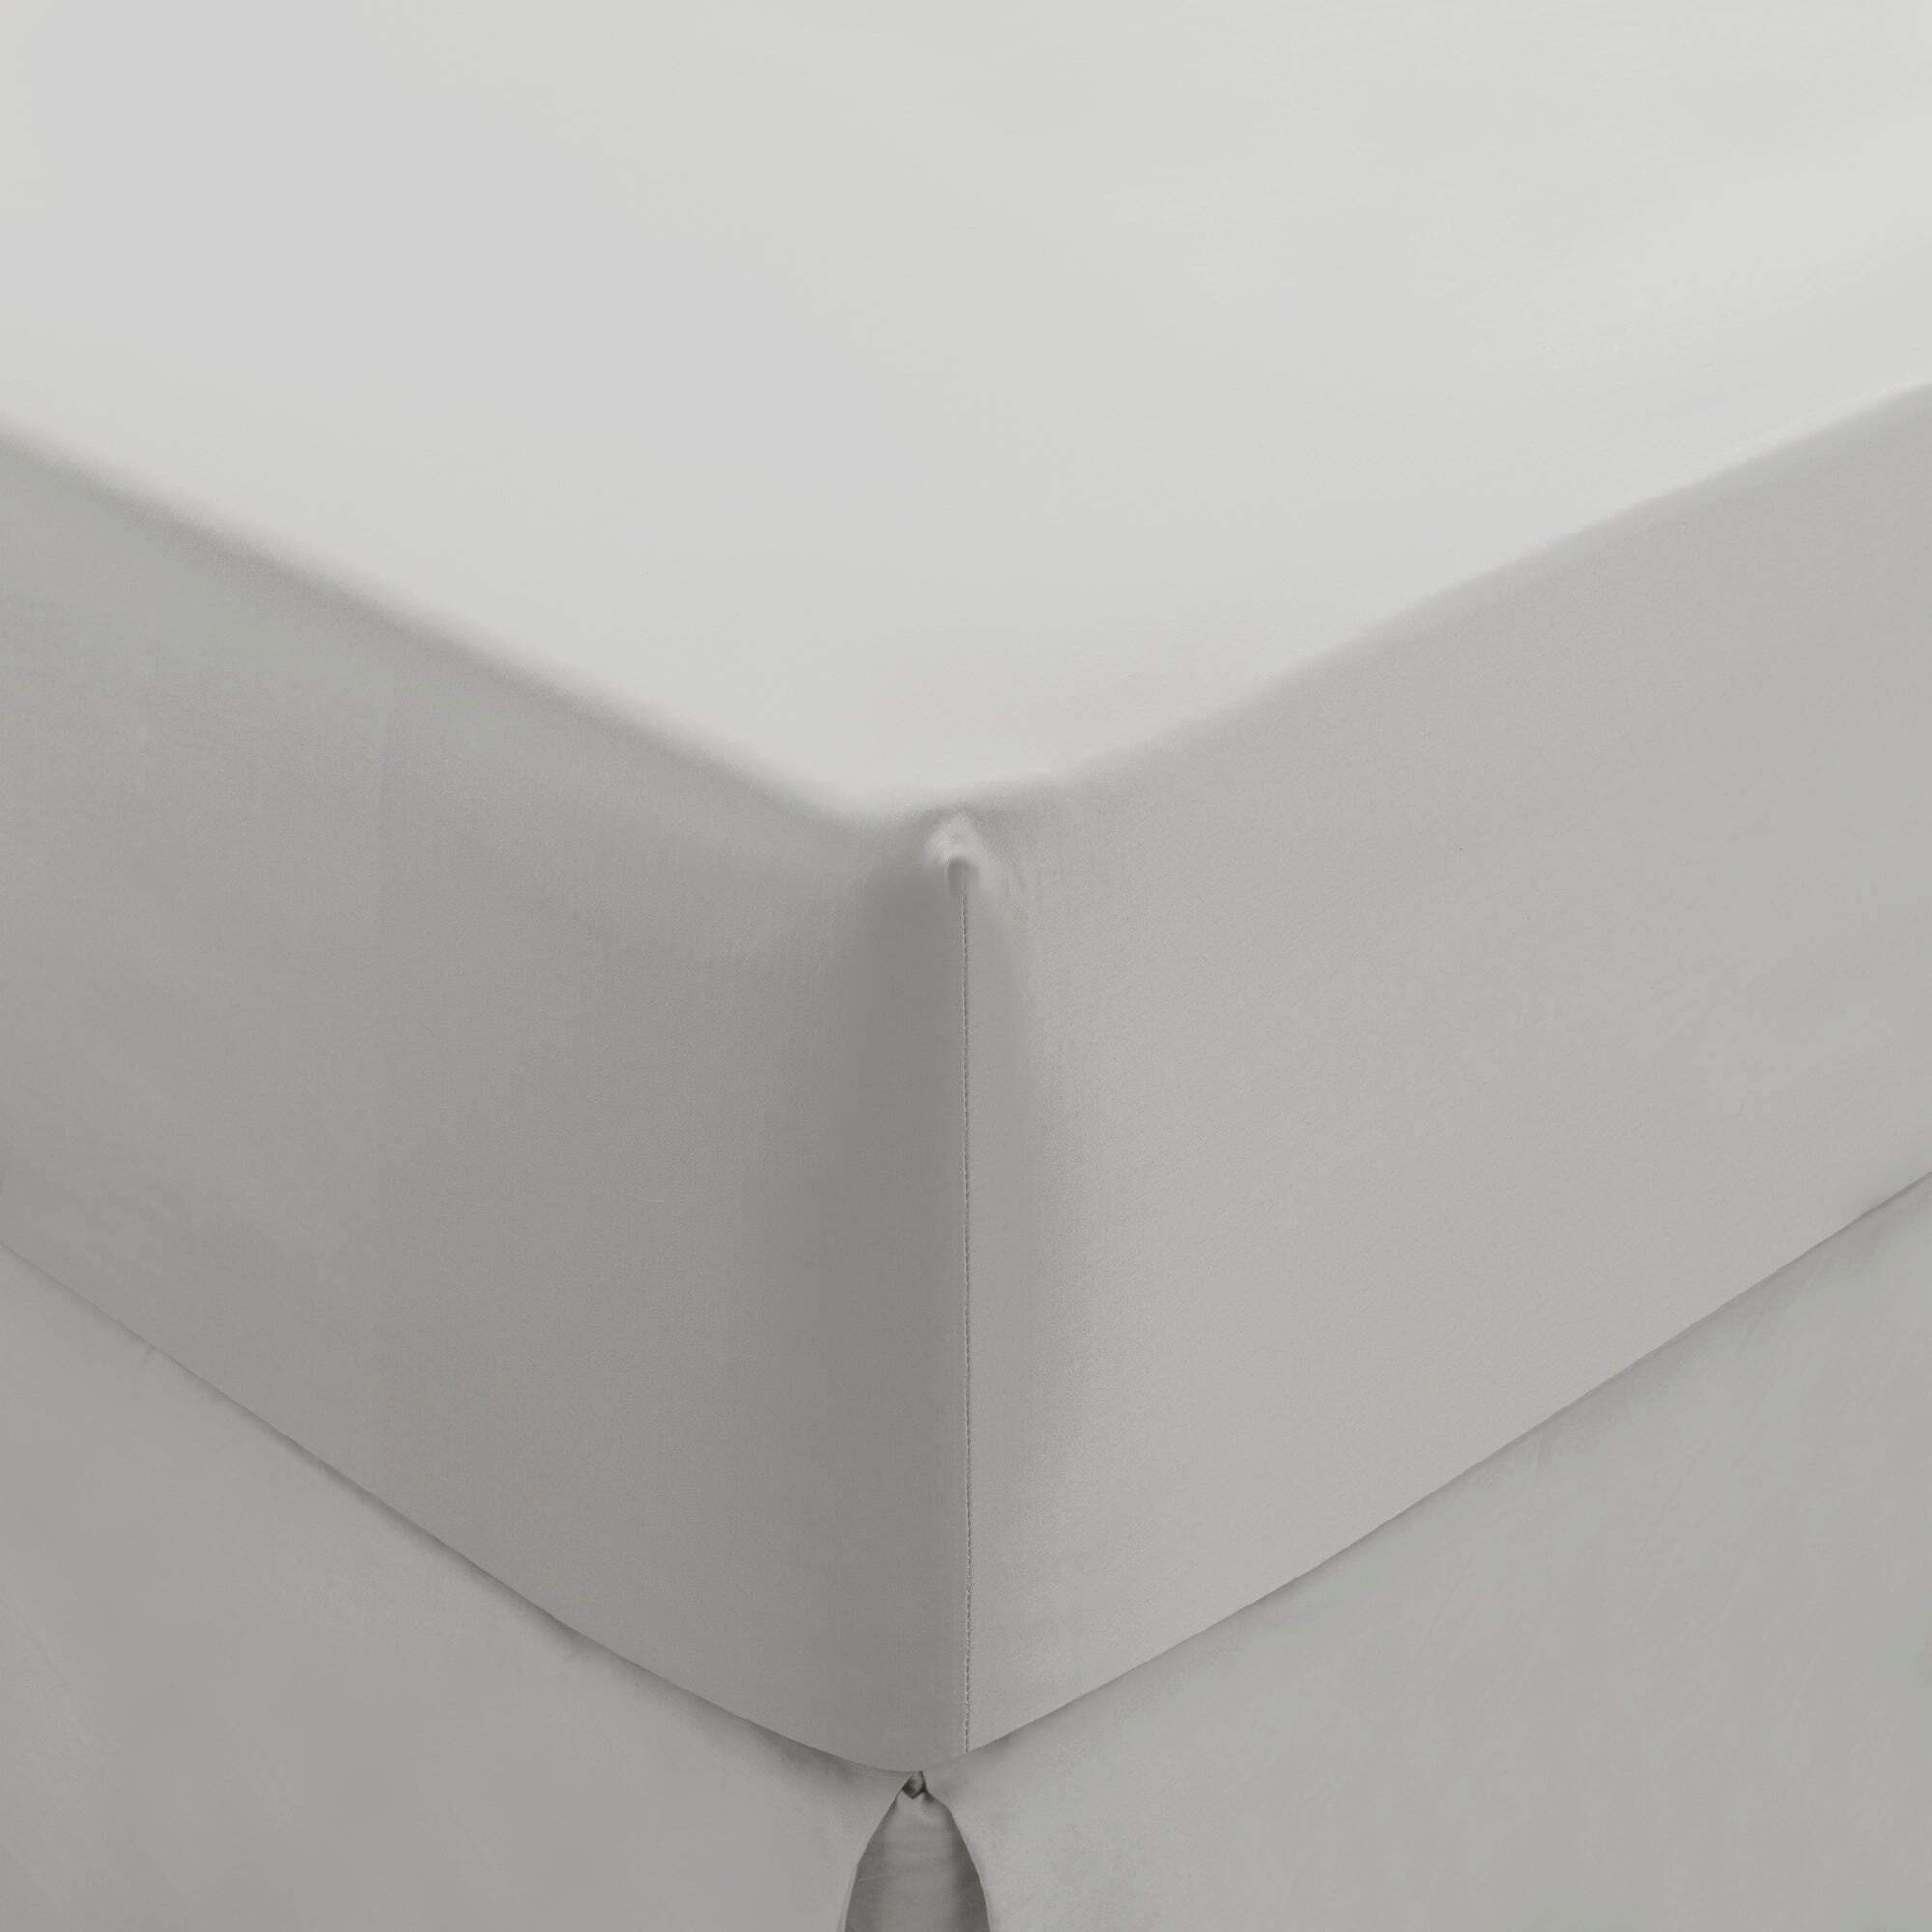 Dorma 300 Thread Count 100% Cotton Sateen Plain Fitted Sheet White